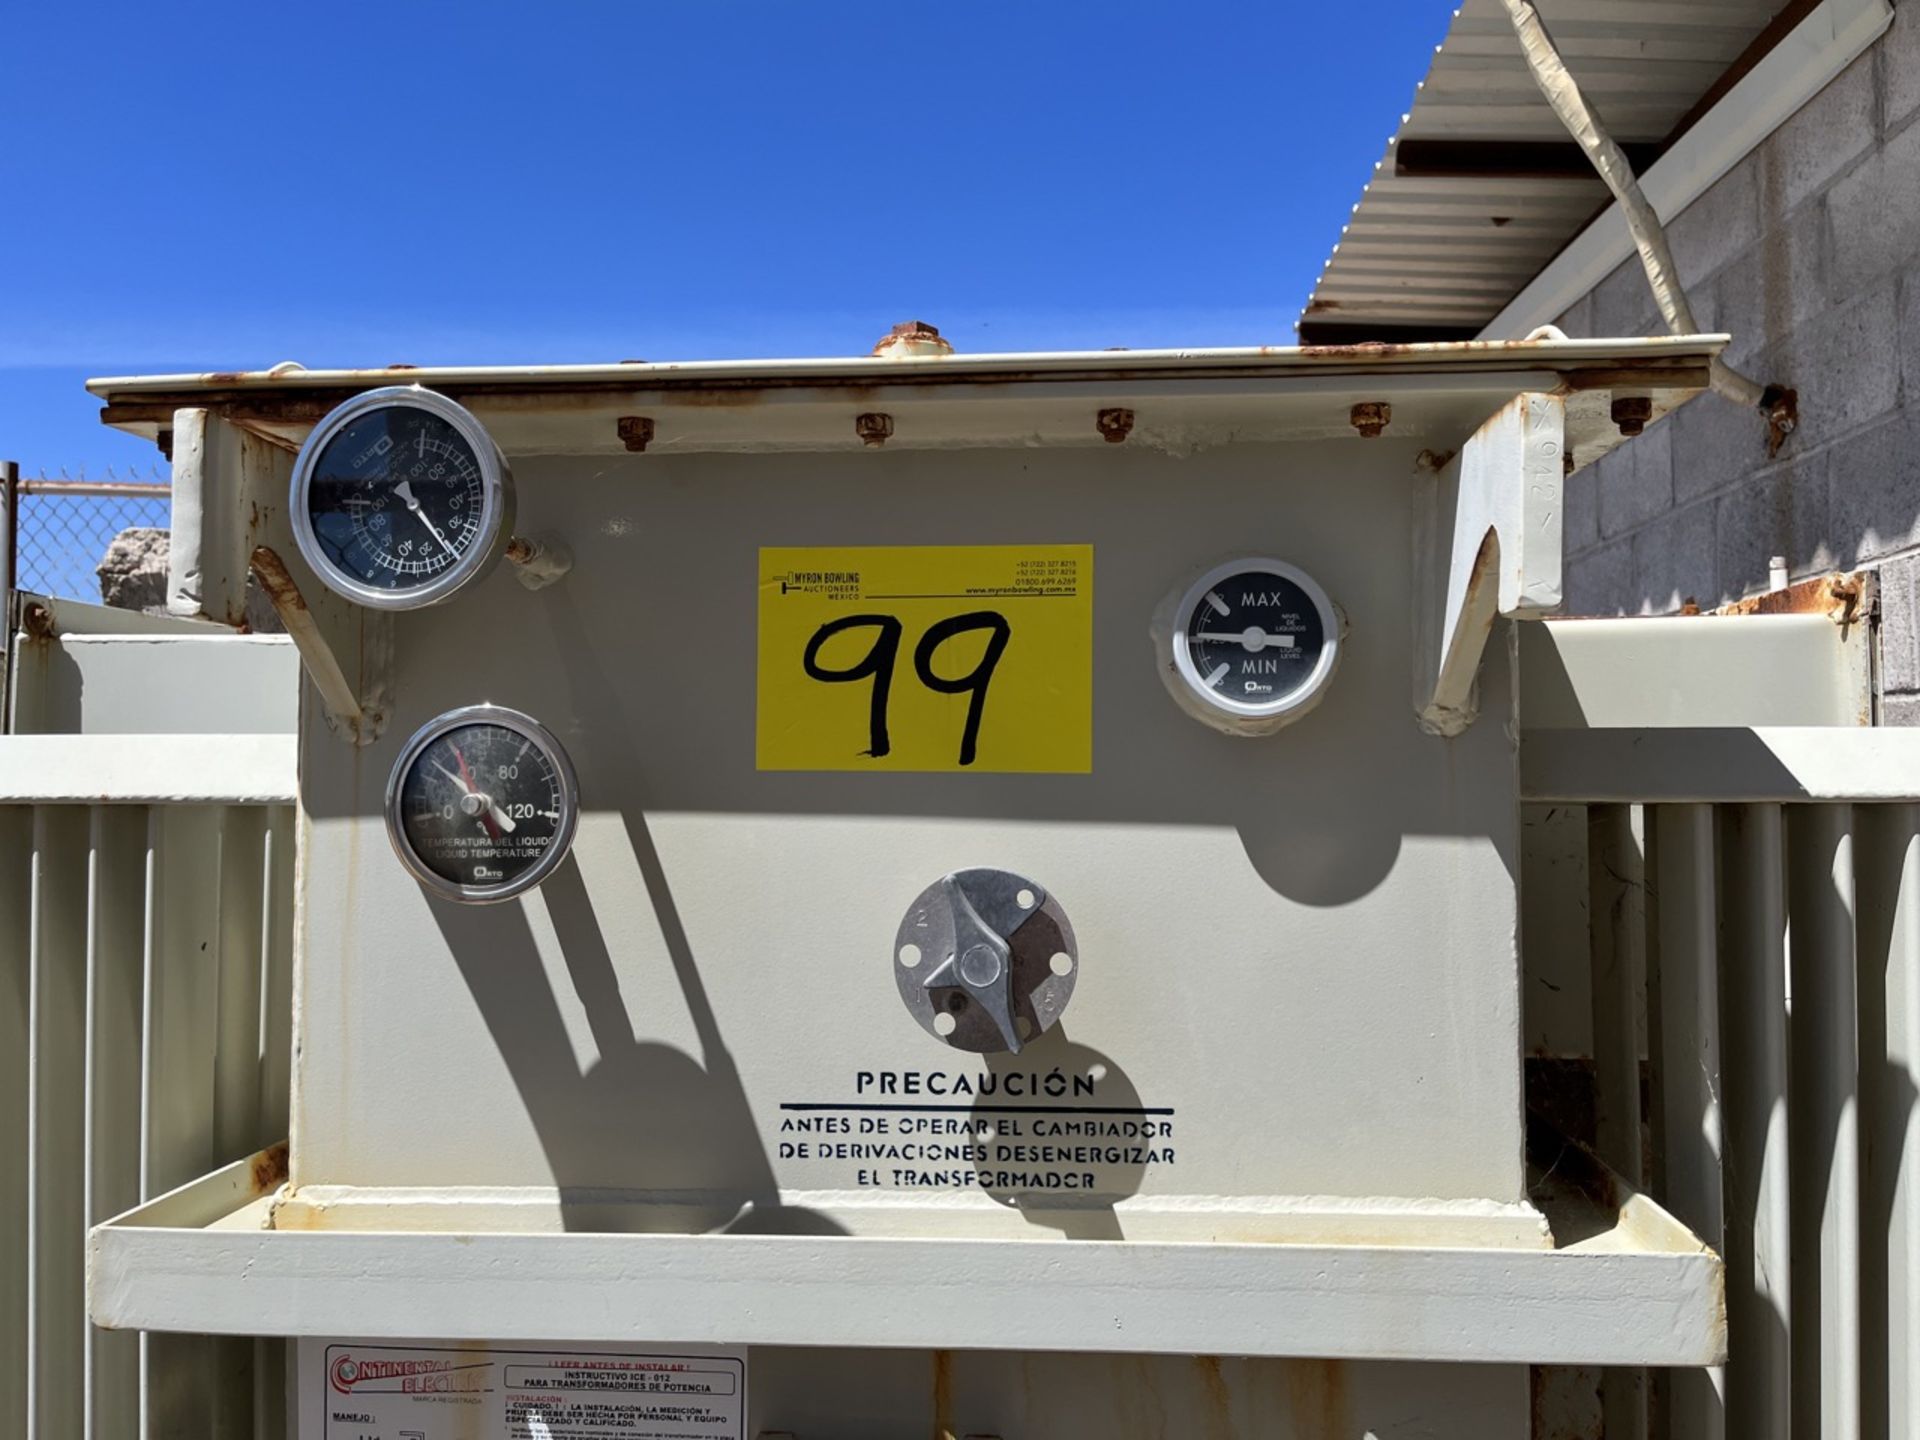 Continental Electric 1500 kVA oil-filled transformer, primary voltage 13200 and secondary 480/277, - Image 6 of 6